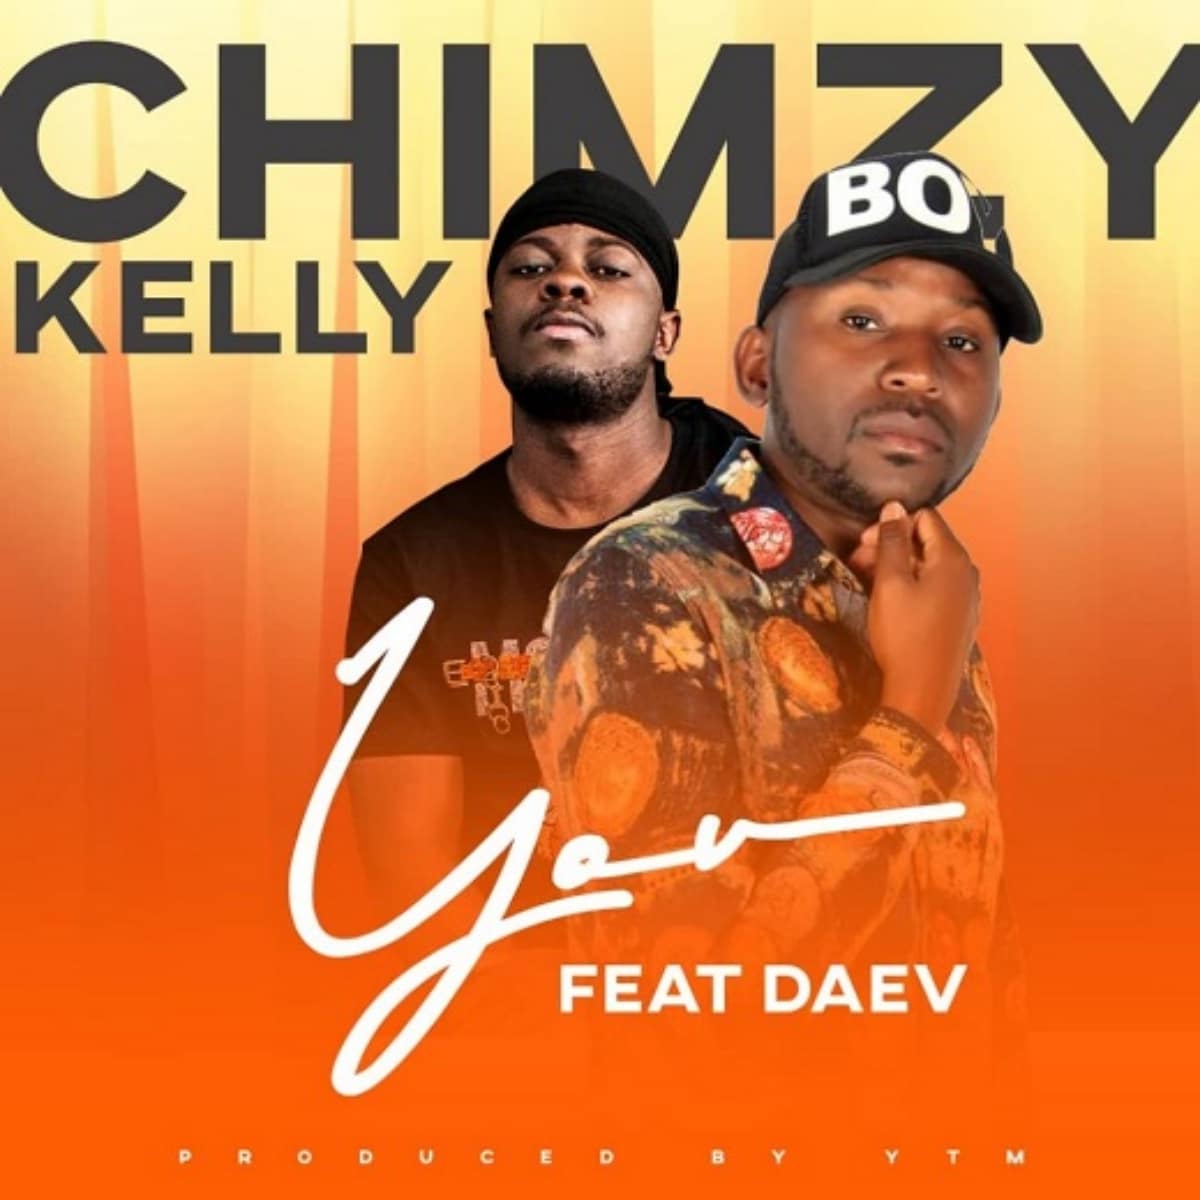 DOWNLOAD: Chimzy Kelly Ft Daev Zambia – “You” Mp3